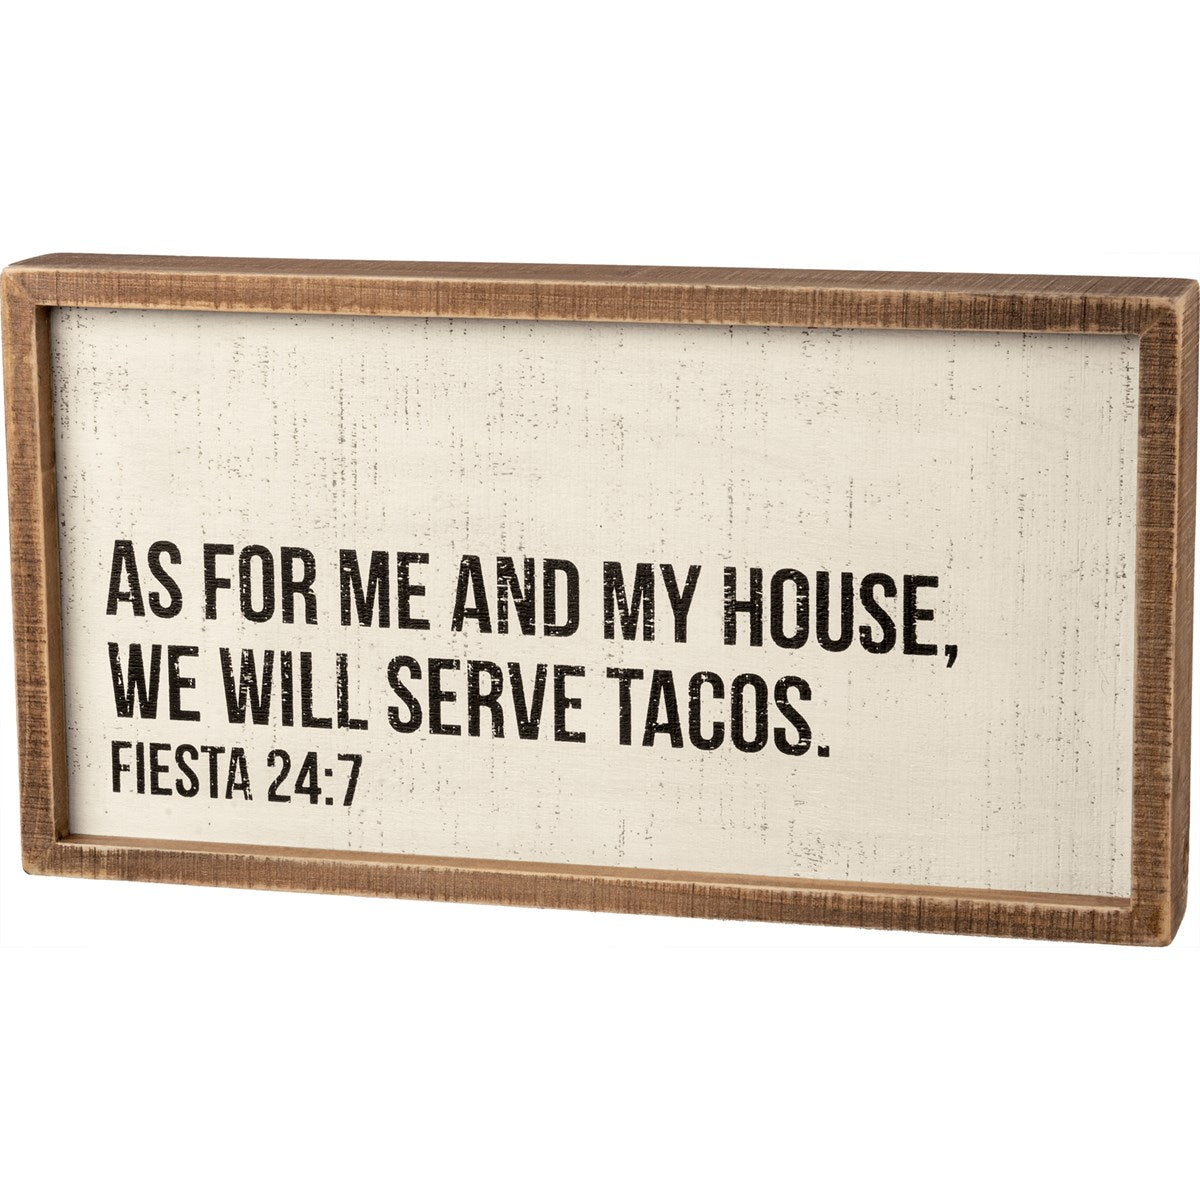 We Will Serve Tacos Inset Box Sign